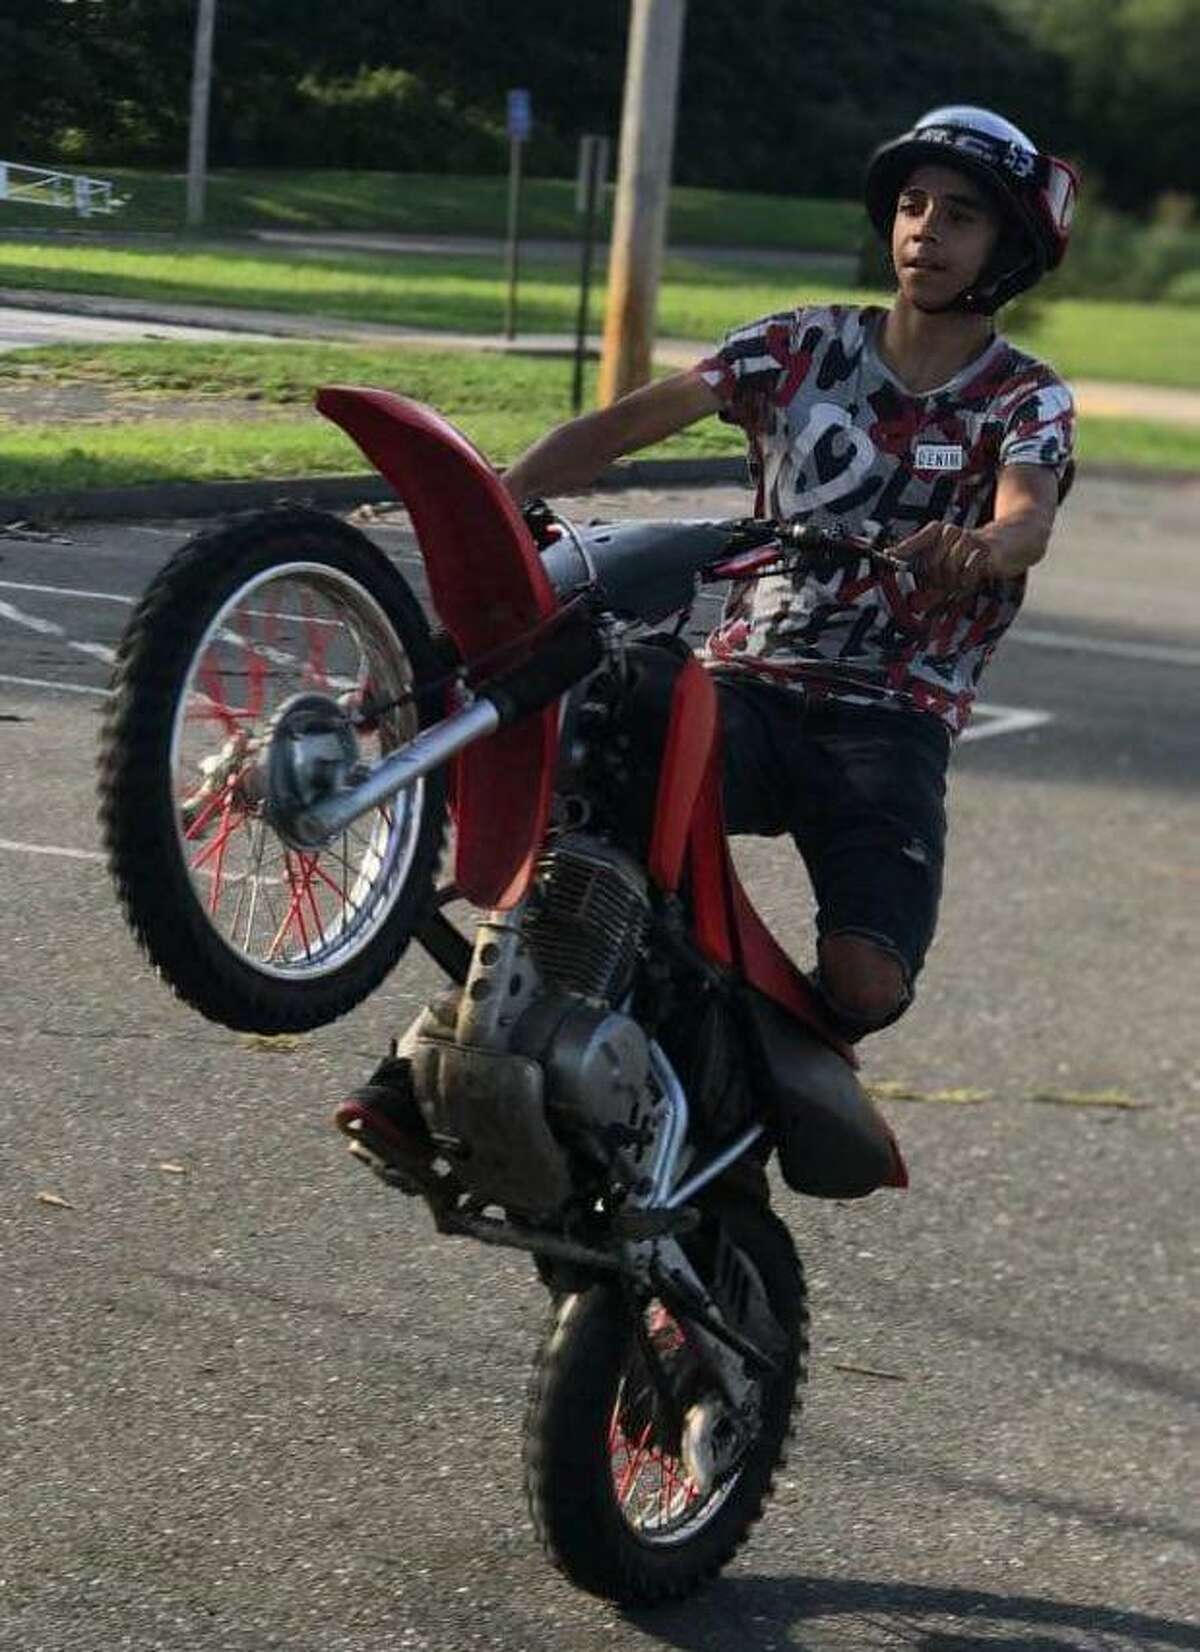 In this undated photo, Adolfo “AJ” DeJesus rides a scooter. DeJesus, 17, of Bridgeport, and a 16-year-old were hospitalized after a pickup truck struck the scooter they were riding on Kossuth Street on June 15. DeJesus was seriously injured and died days later, his family said.